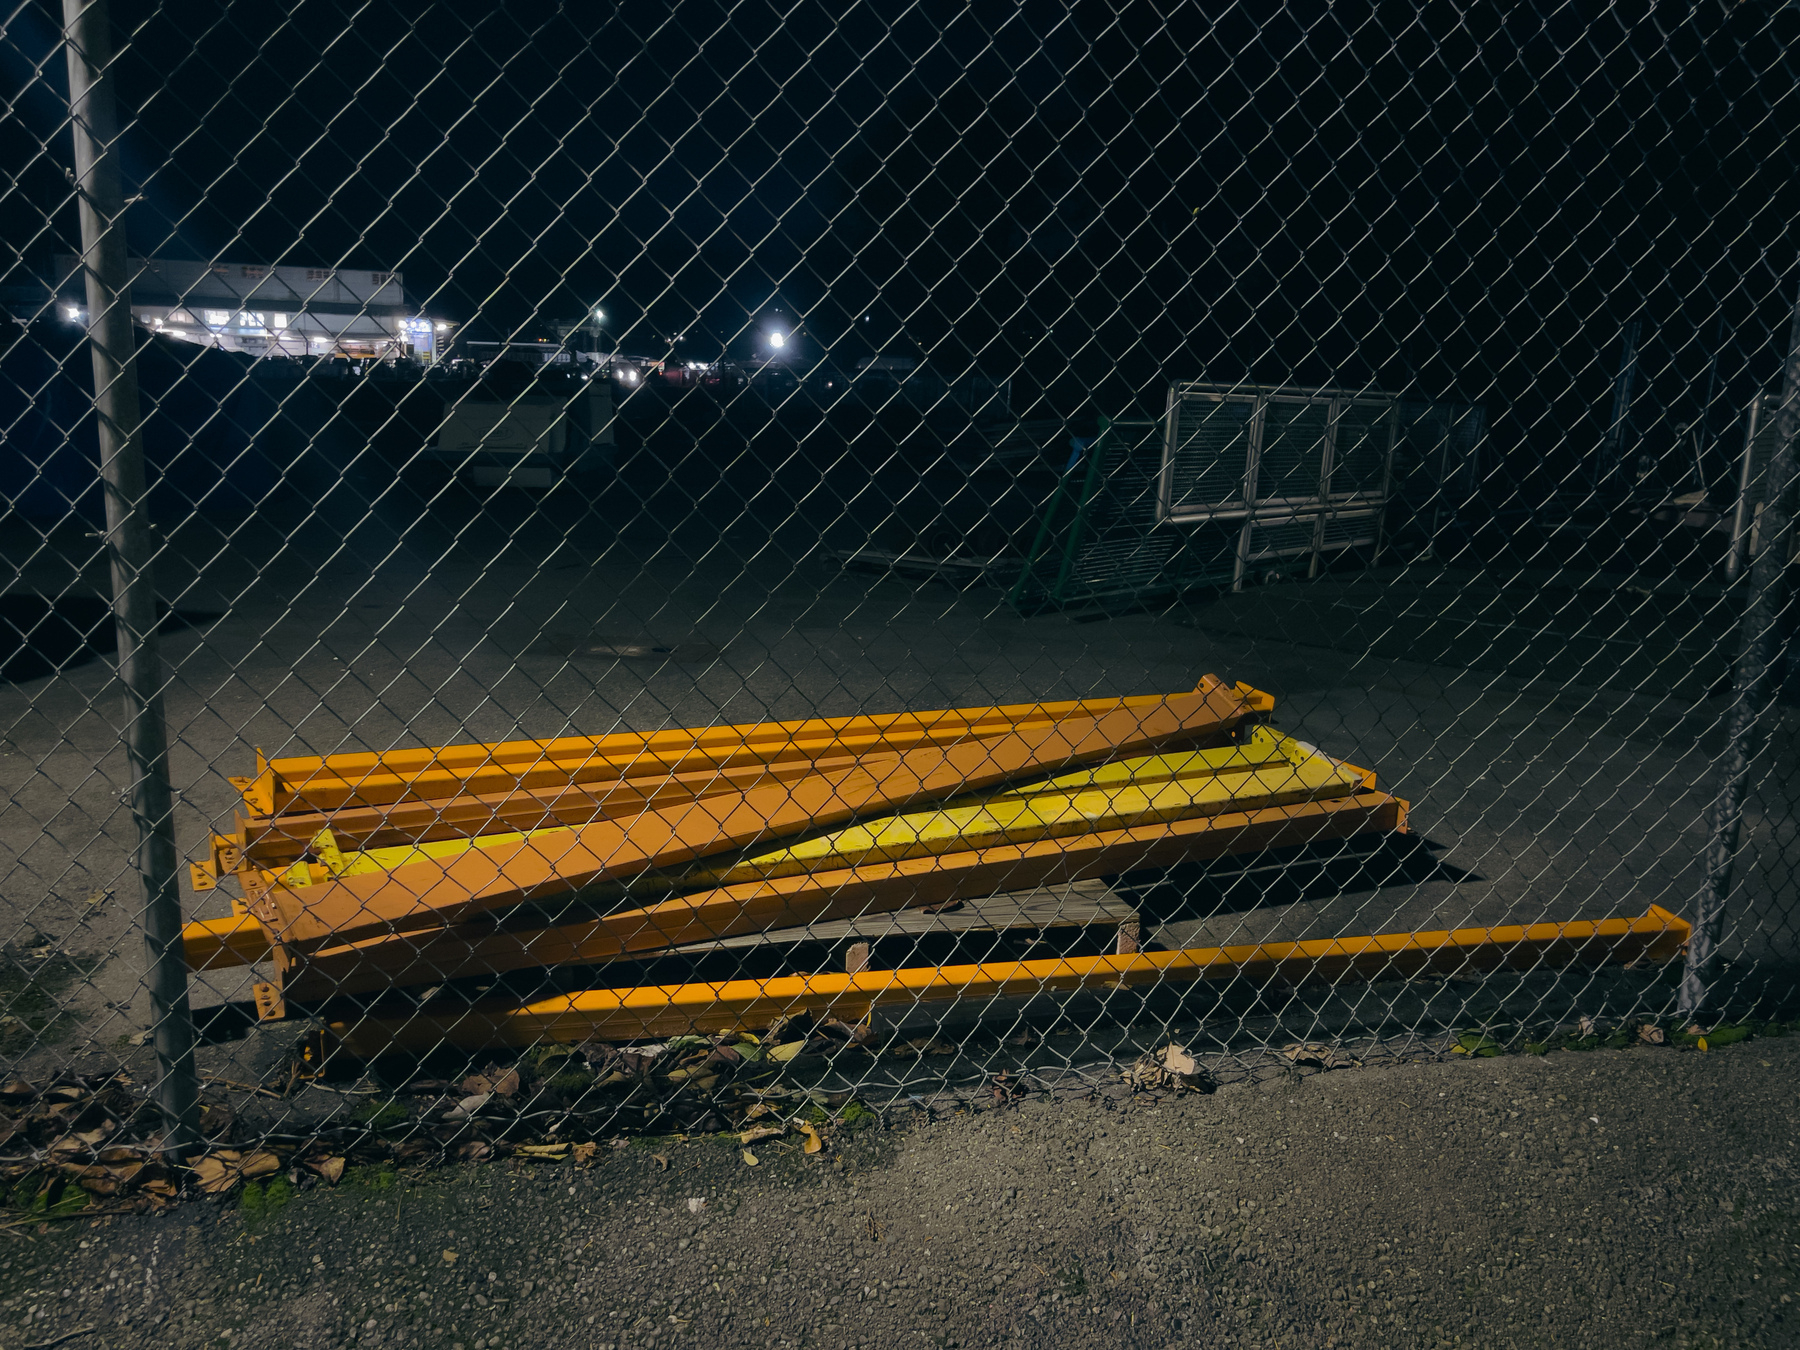 Rusted steel framing components on ground behind chain link fence, scene illuminated by security lights.